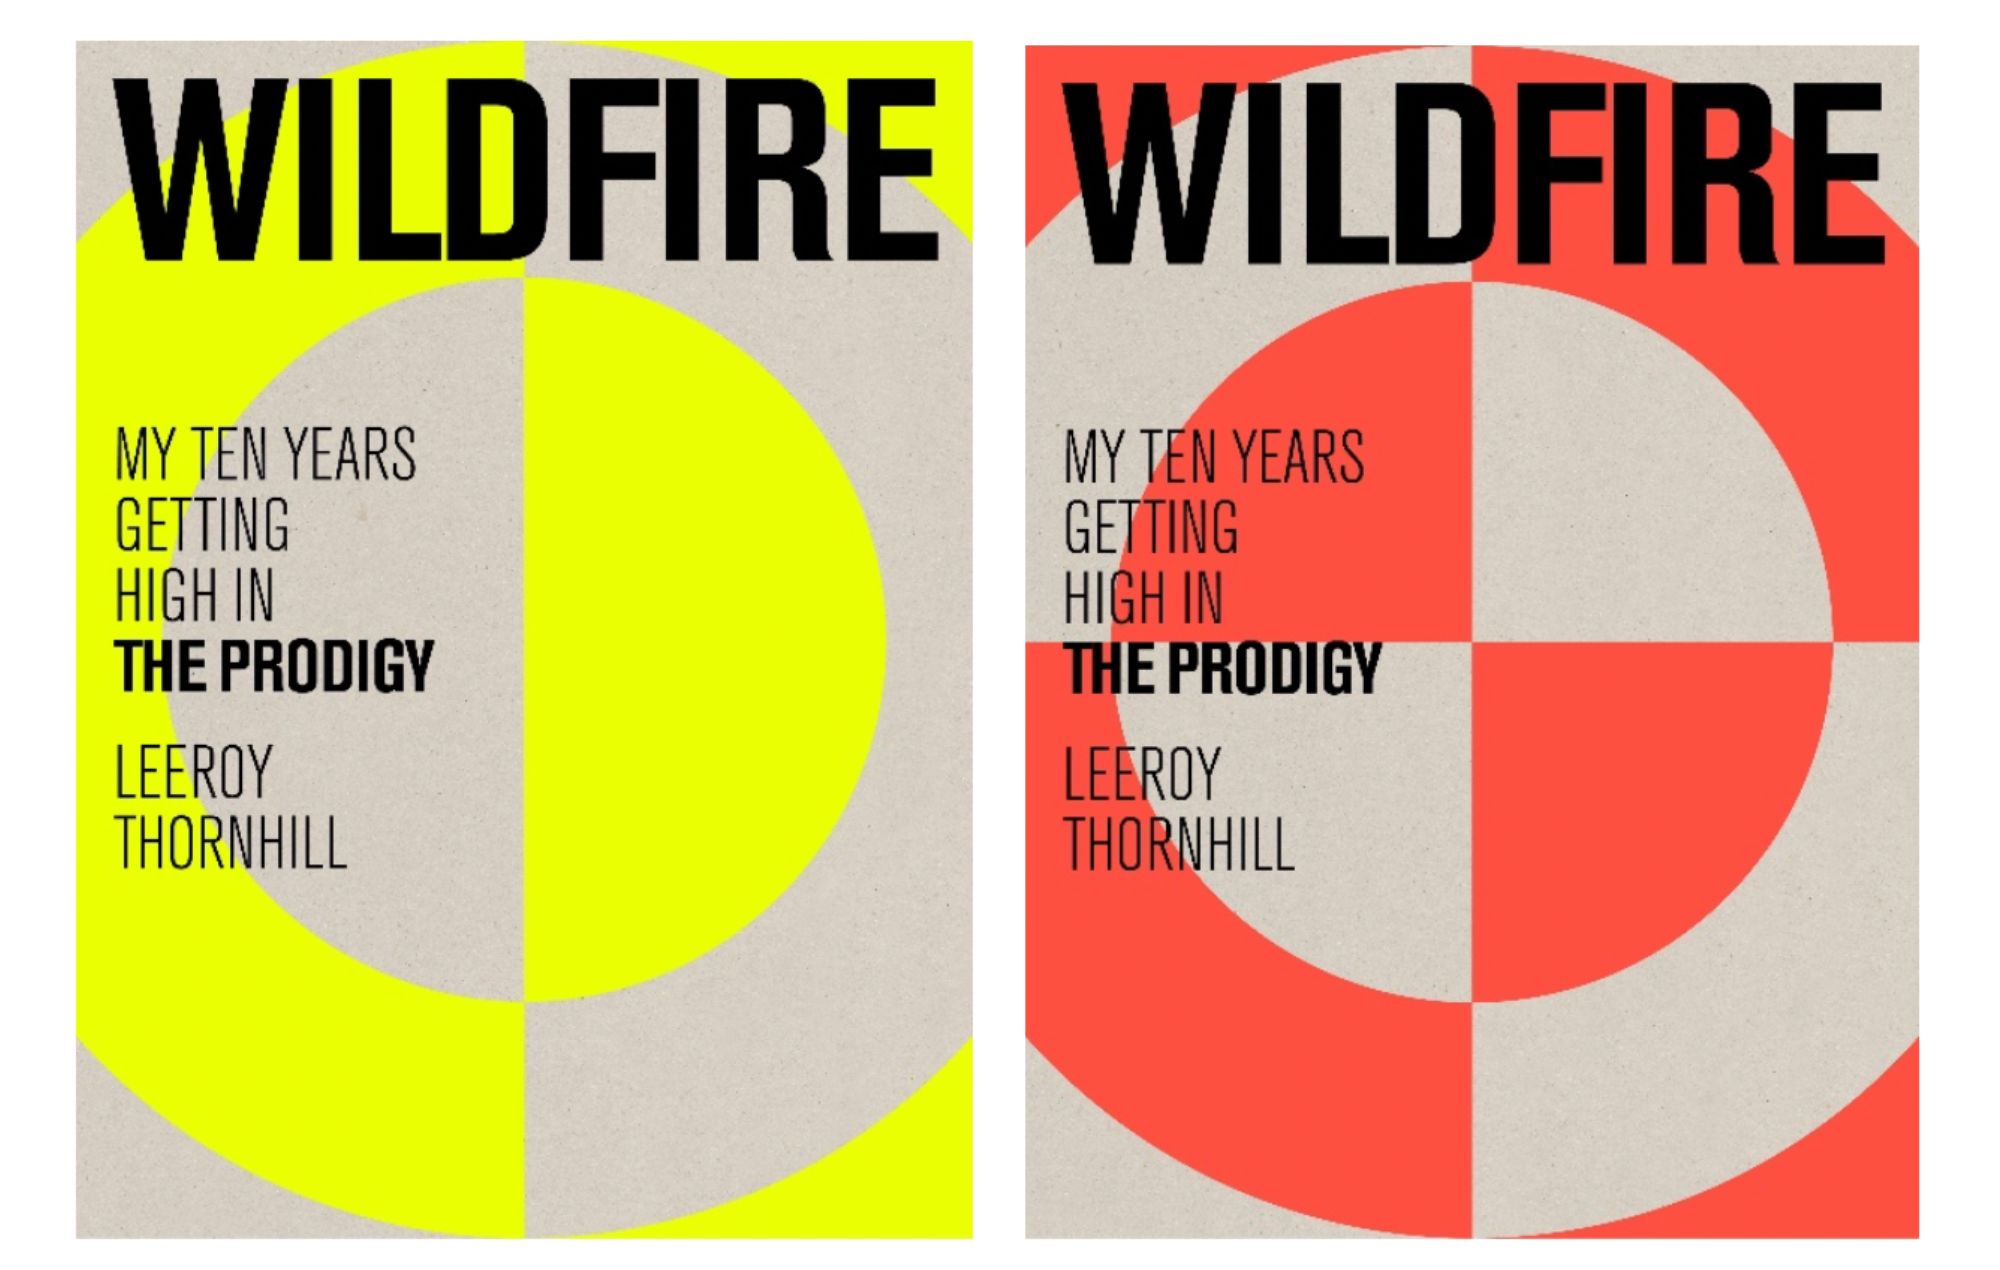  'Wildfire: My Ten Years Getting High In The Prodigy' 